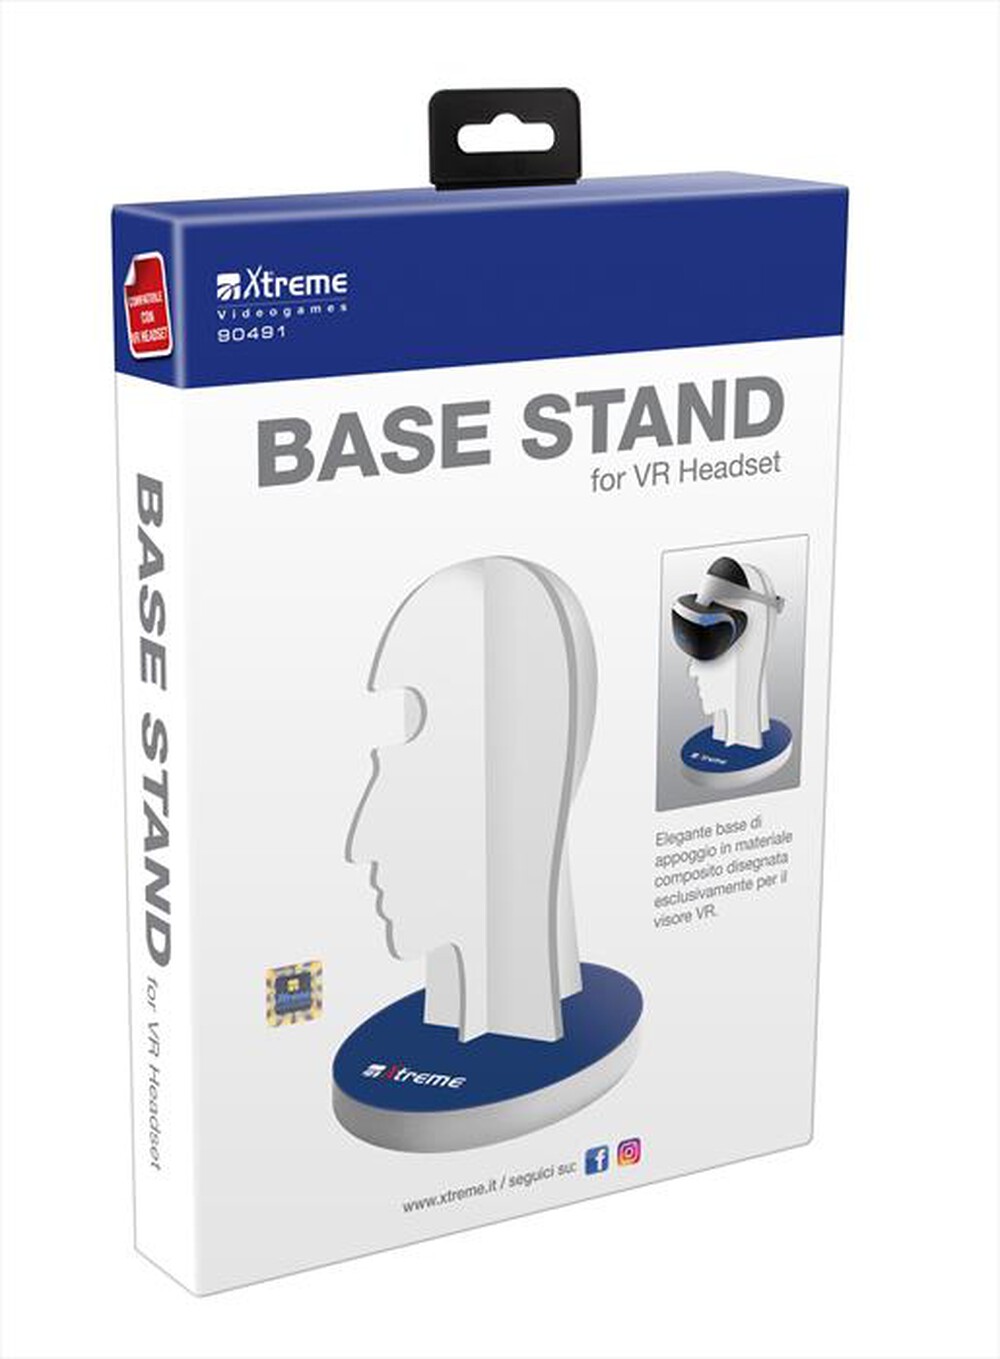 "XTREME - 90491 - VR Base stand"